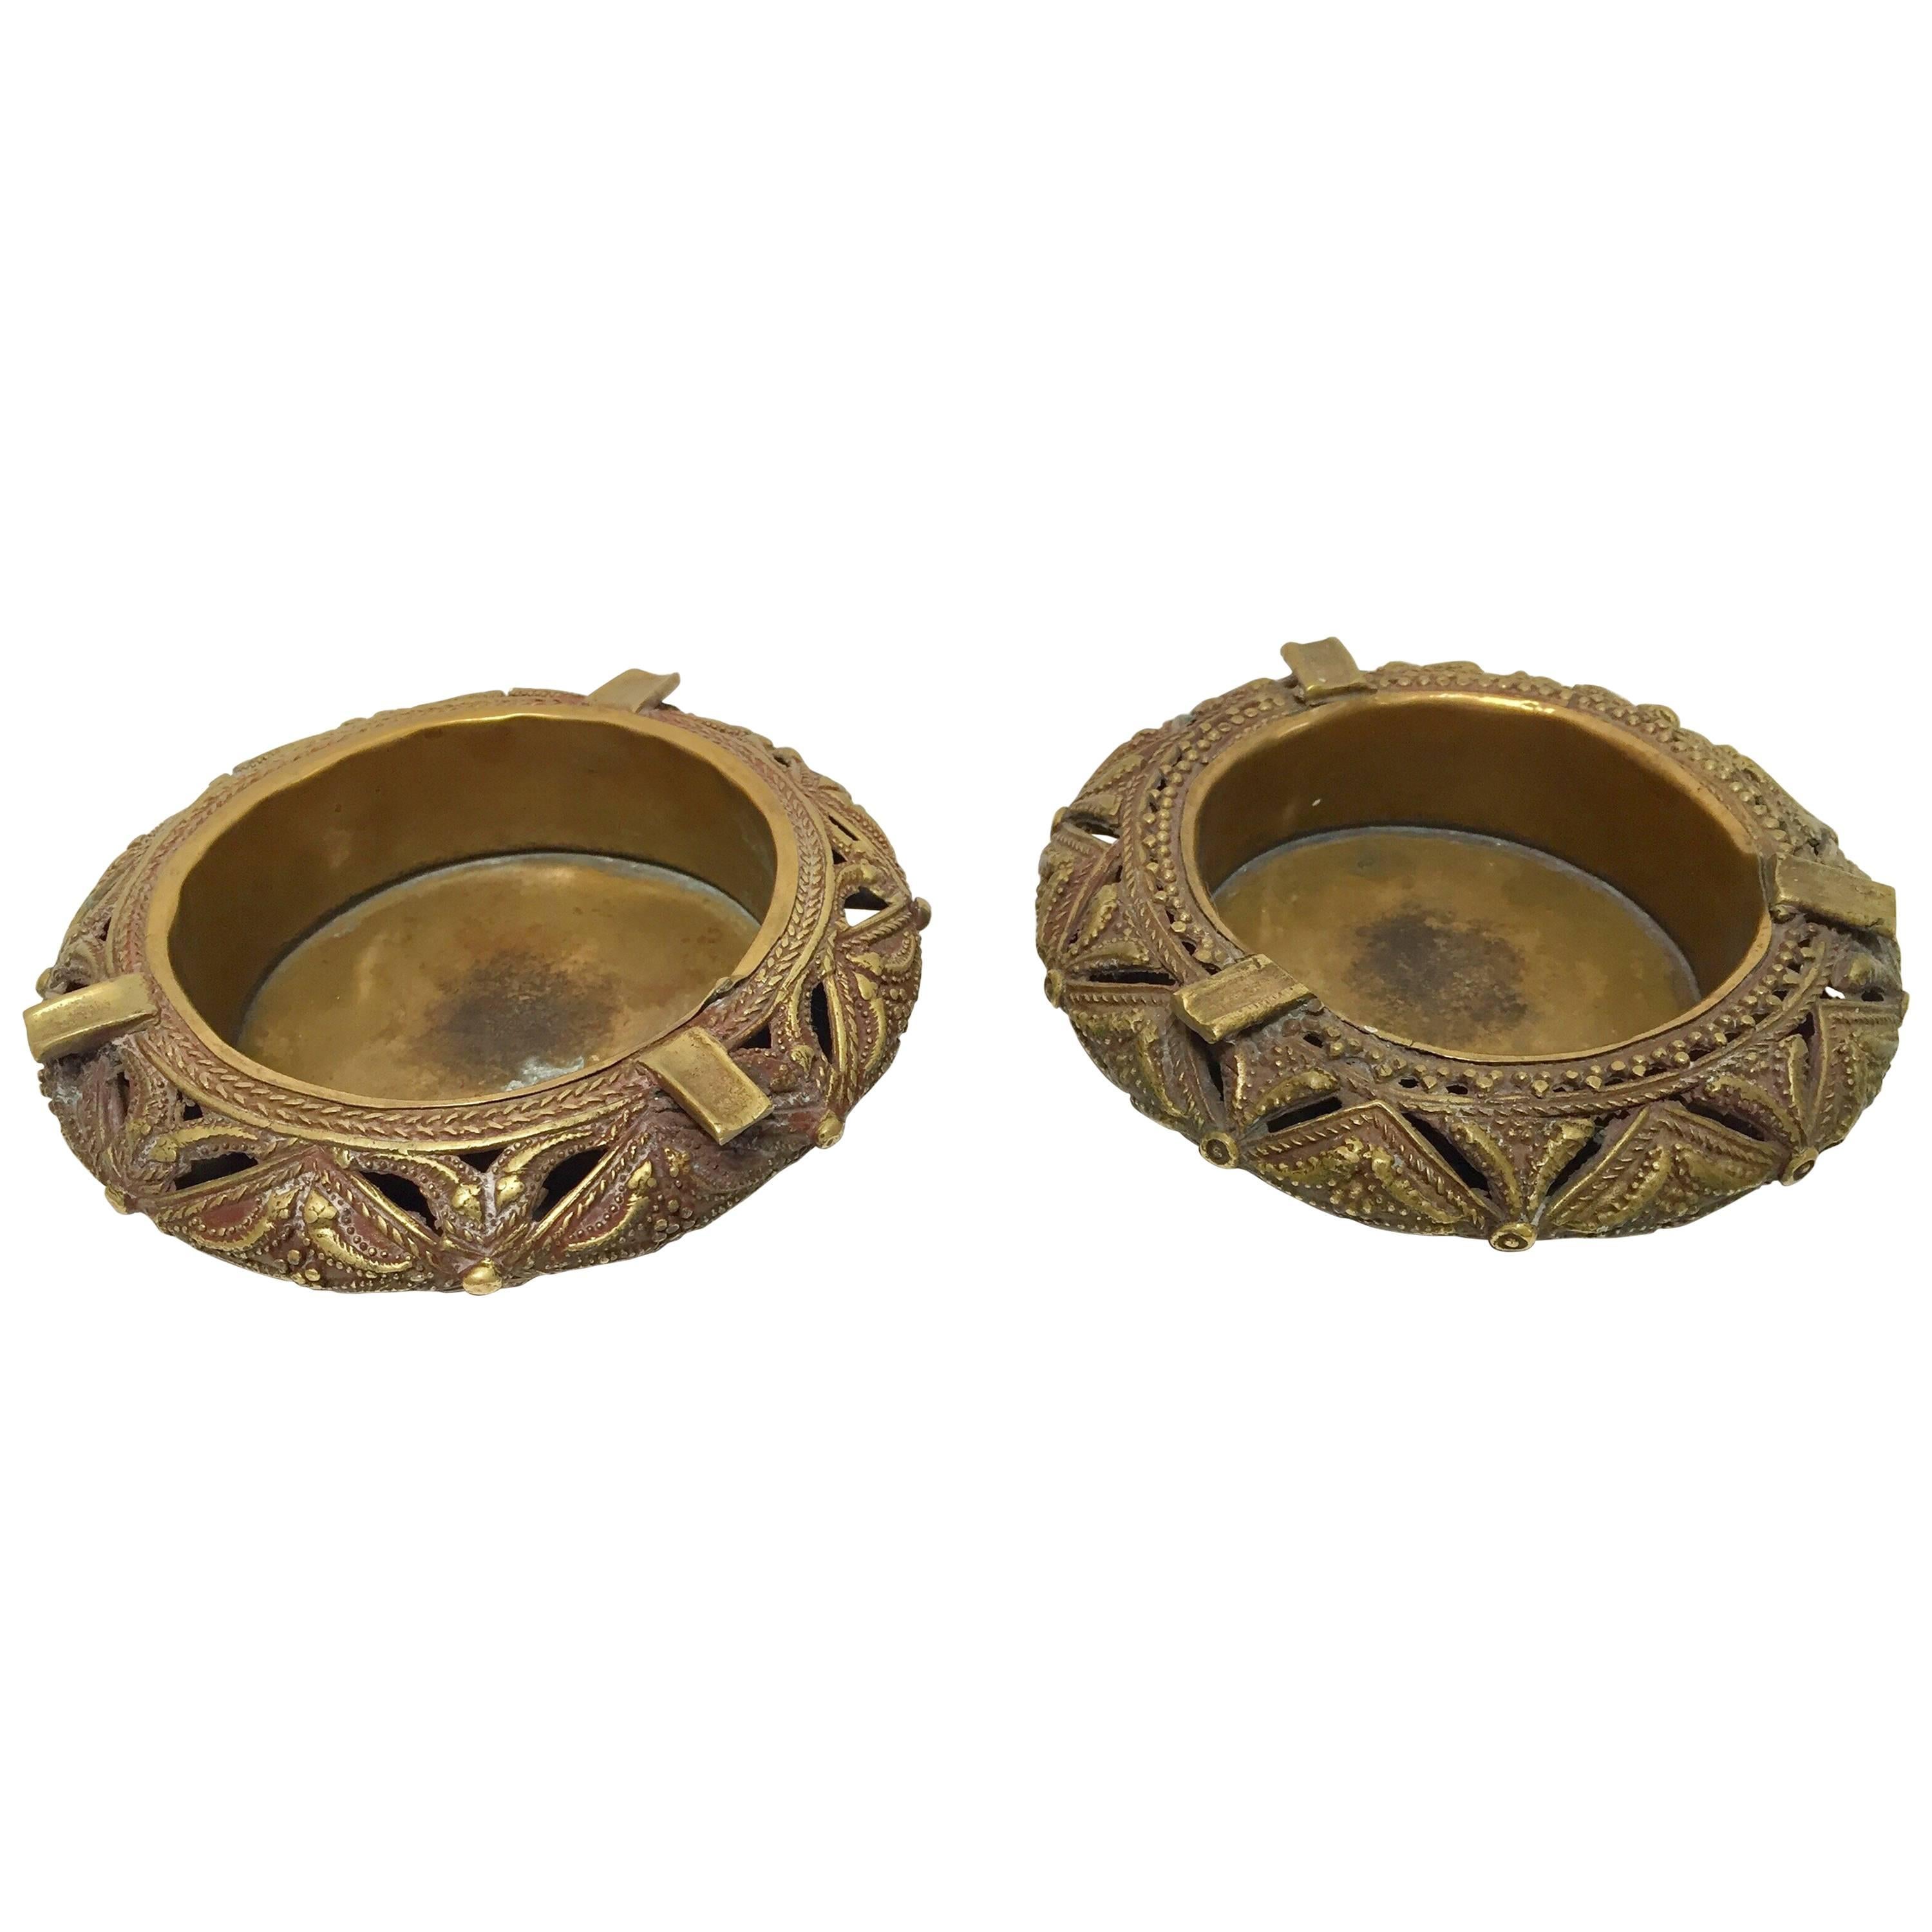 Pair of Round Handcrafted Brass Ashtrays For Sale